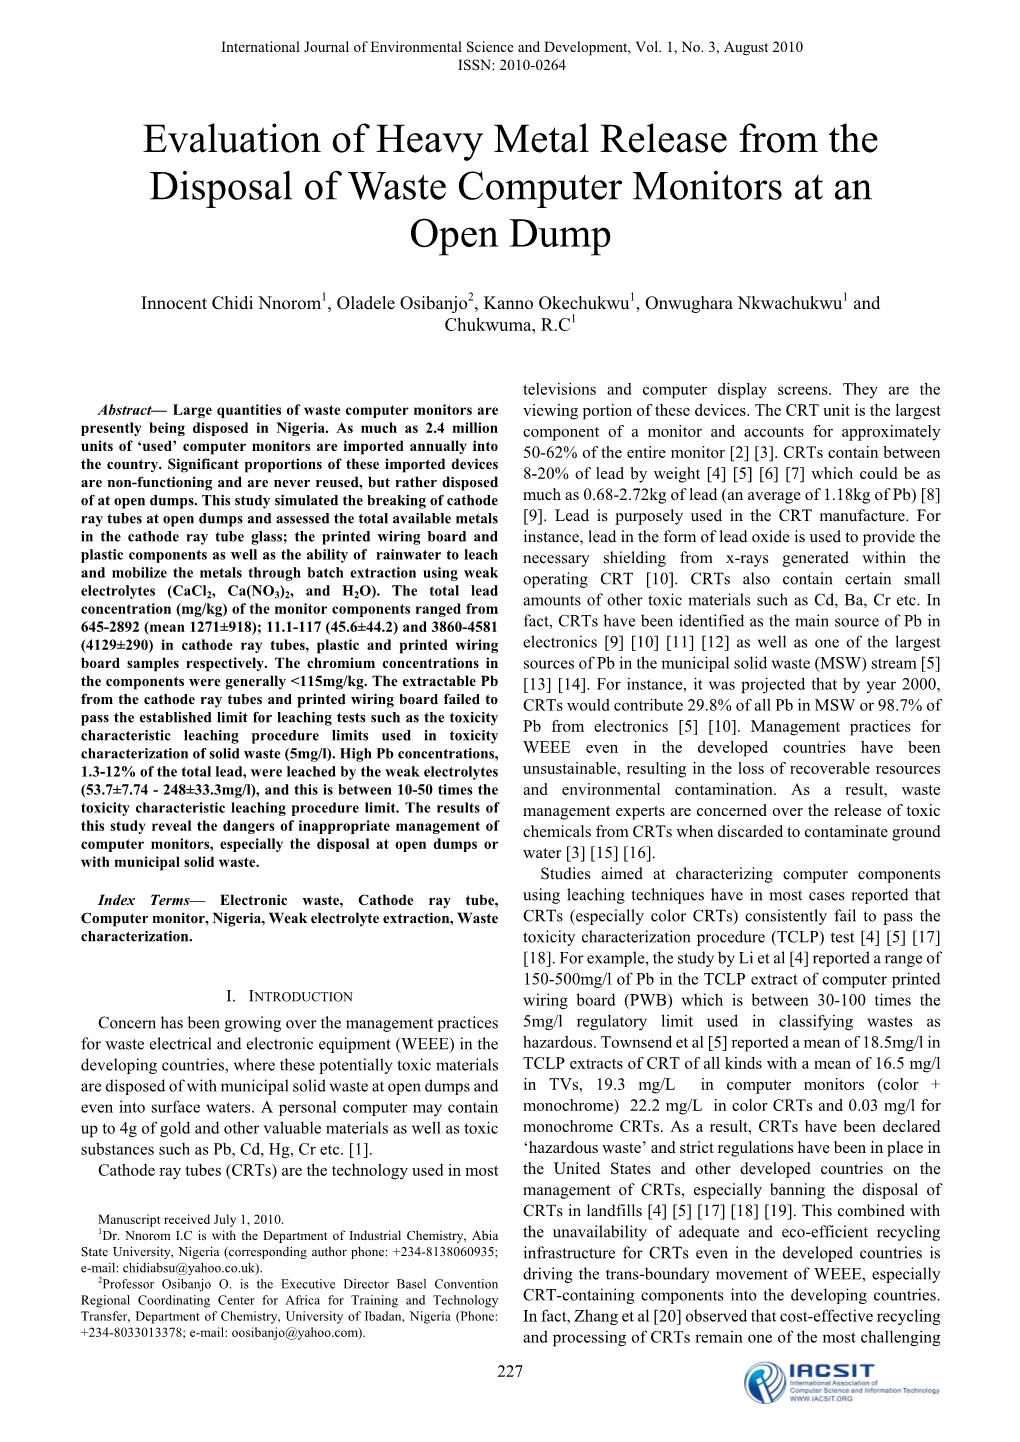 Evaluation of Heavy Metal Release from the Disposal of Waste Computer Monitors at an Open Dump